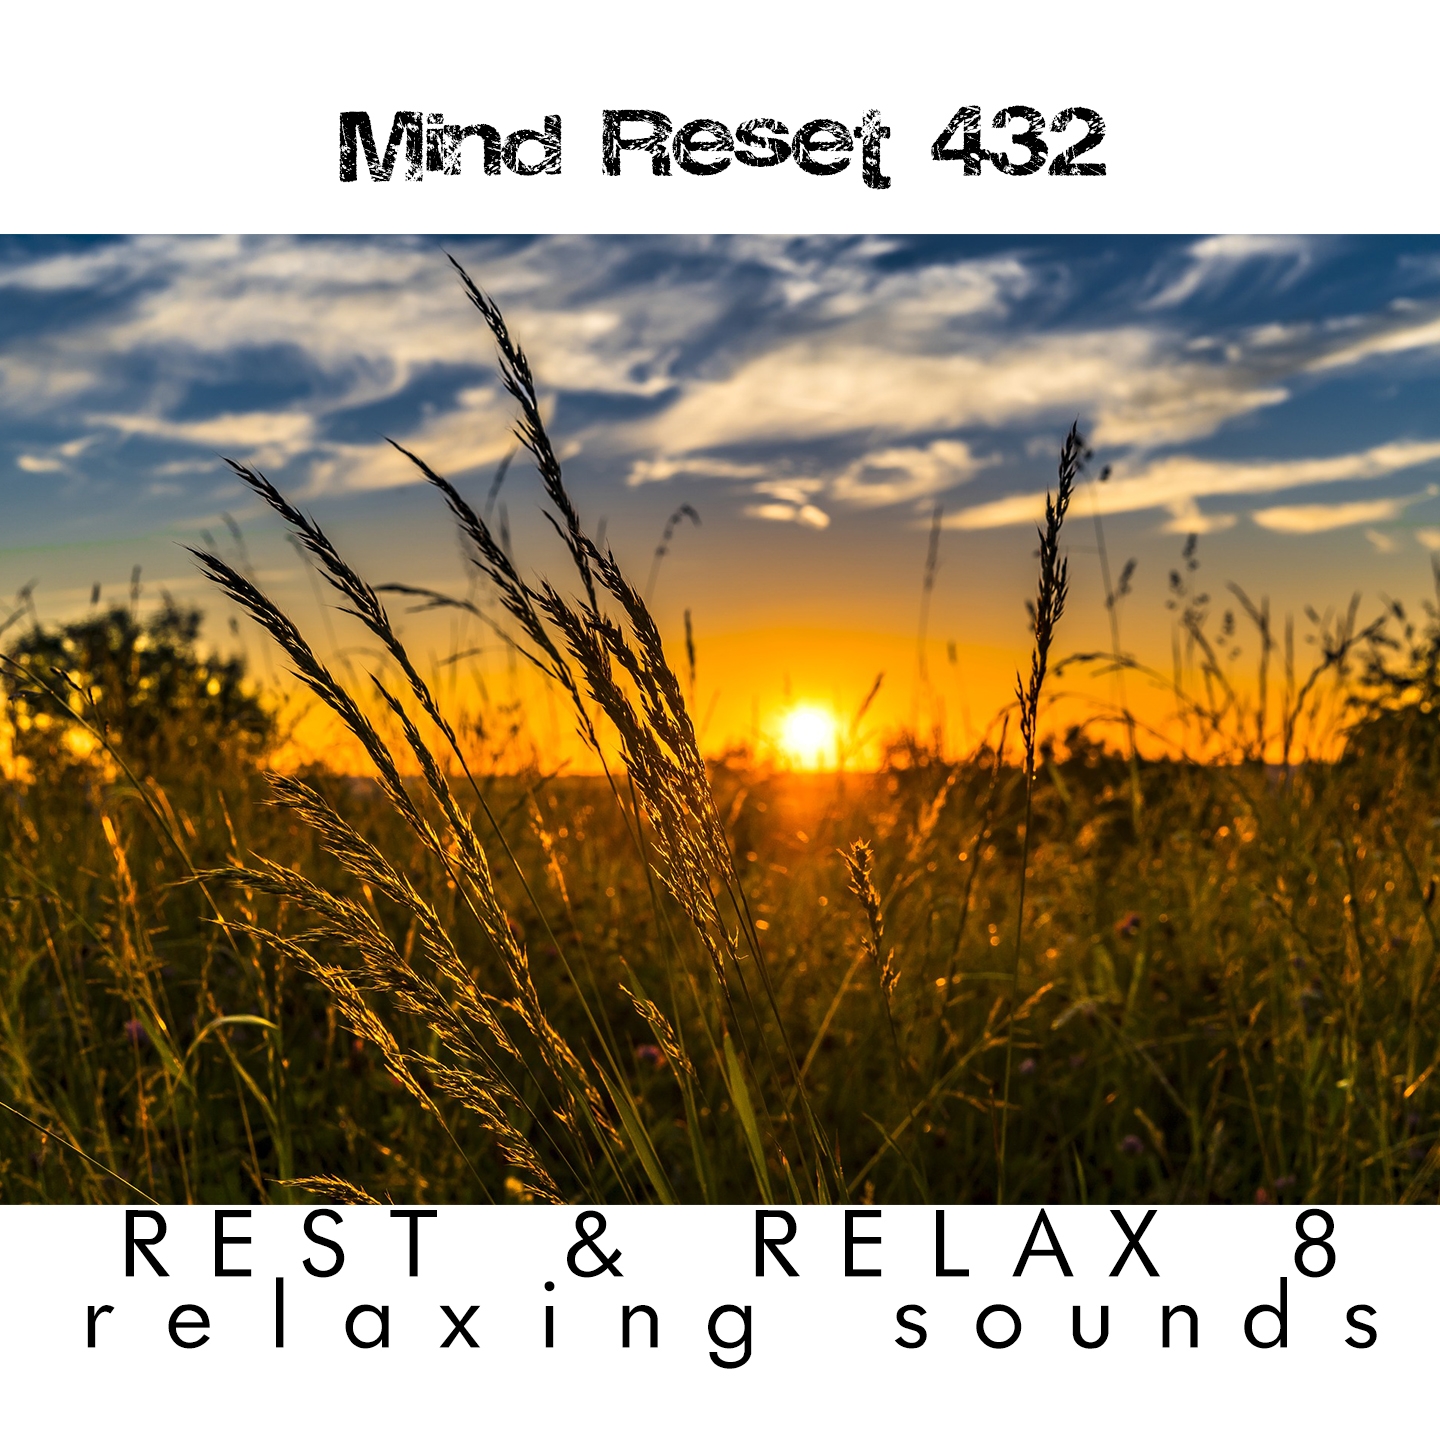 Rest and Relax 8 (Relaxing sounds)